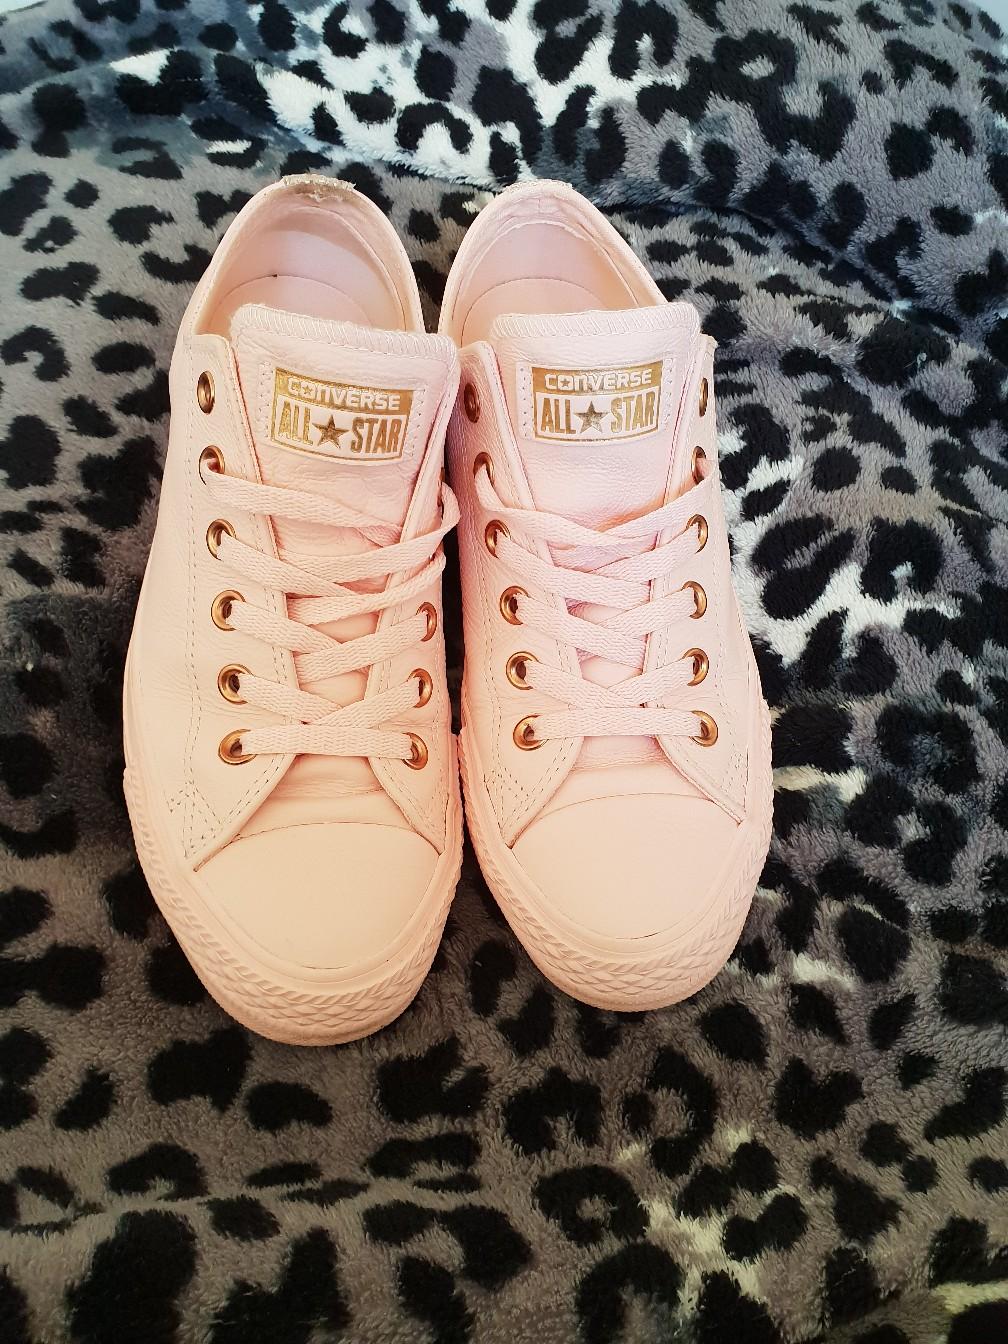 converse pink leather rose gold